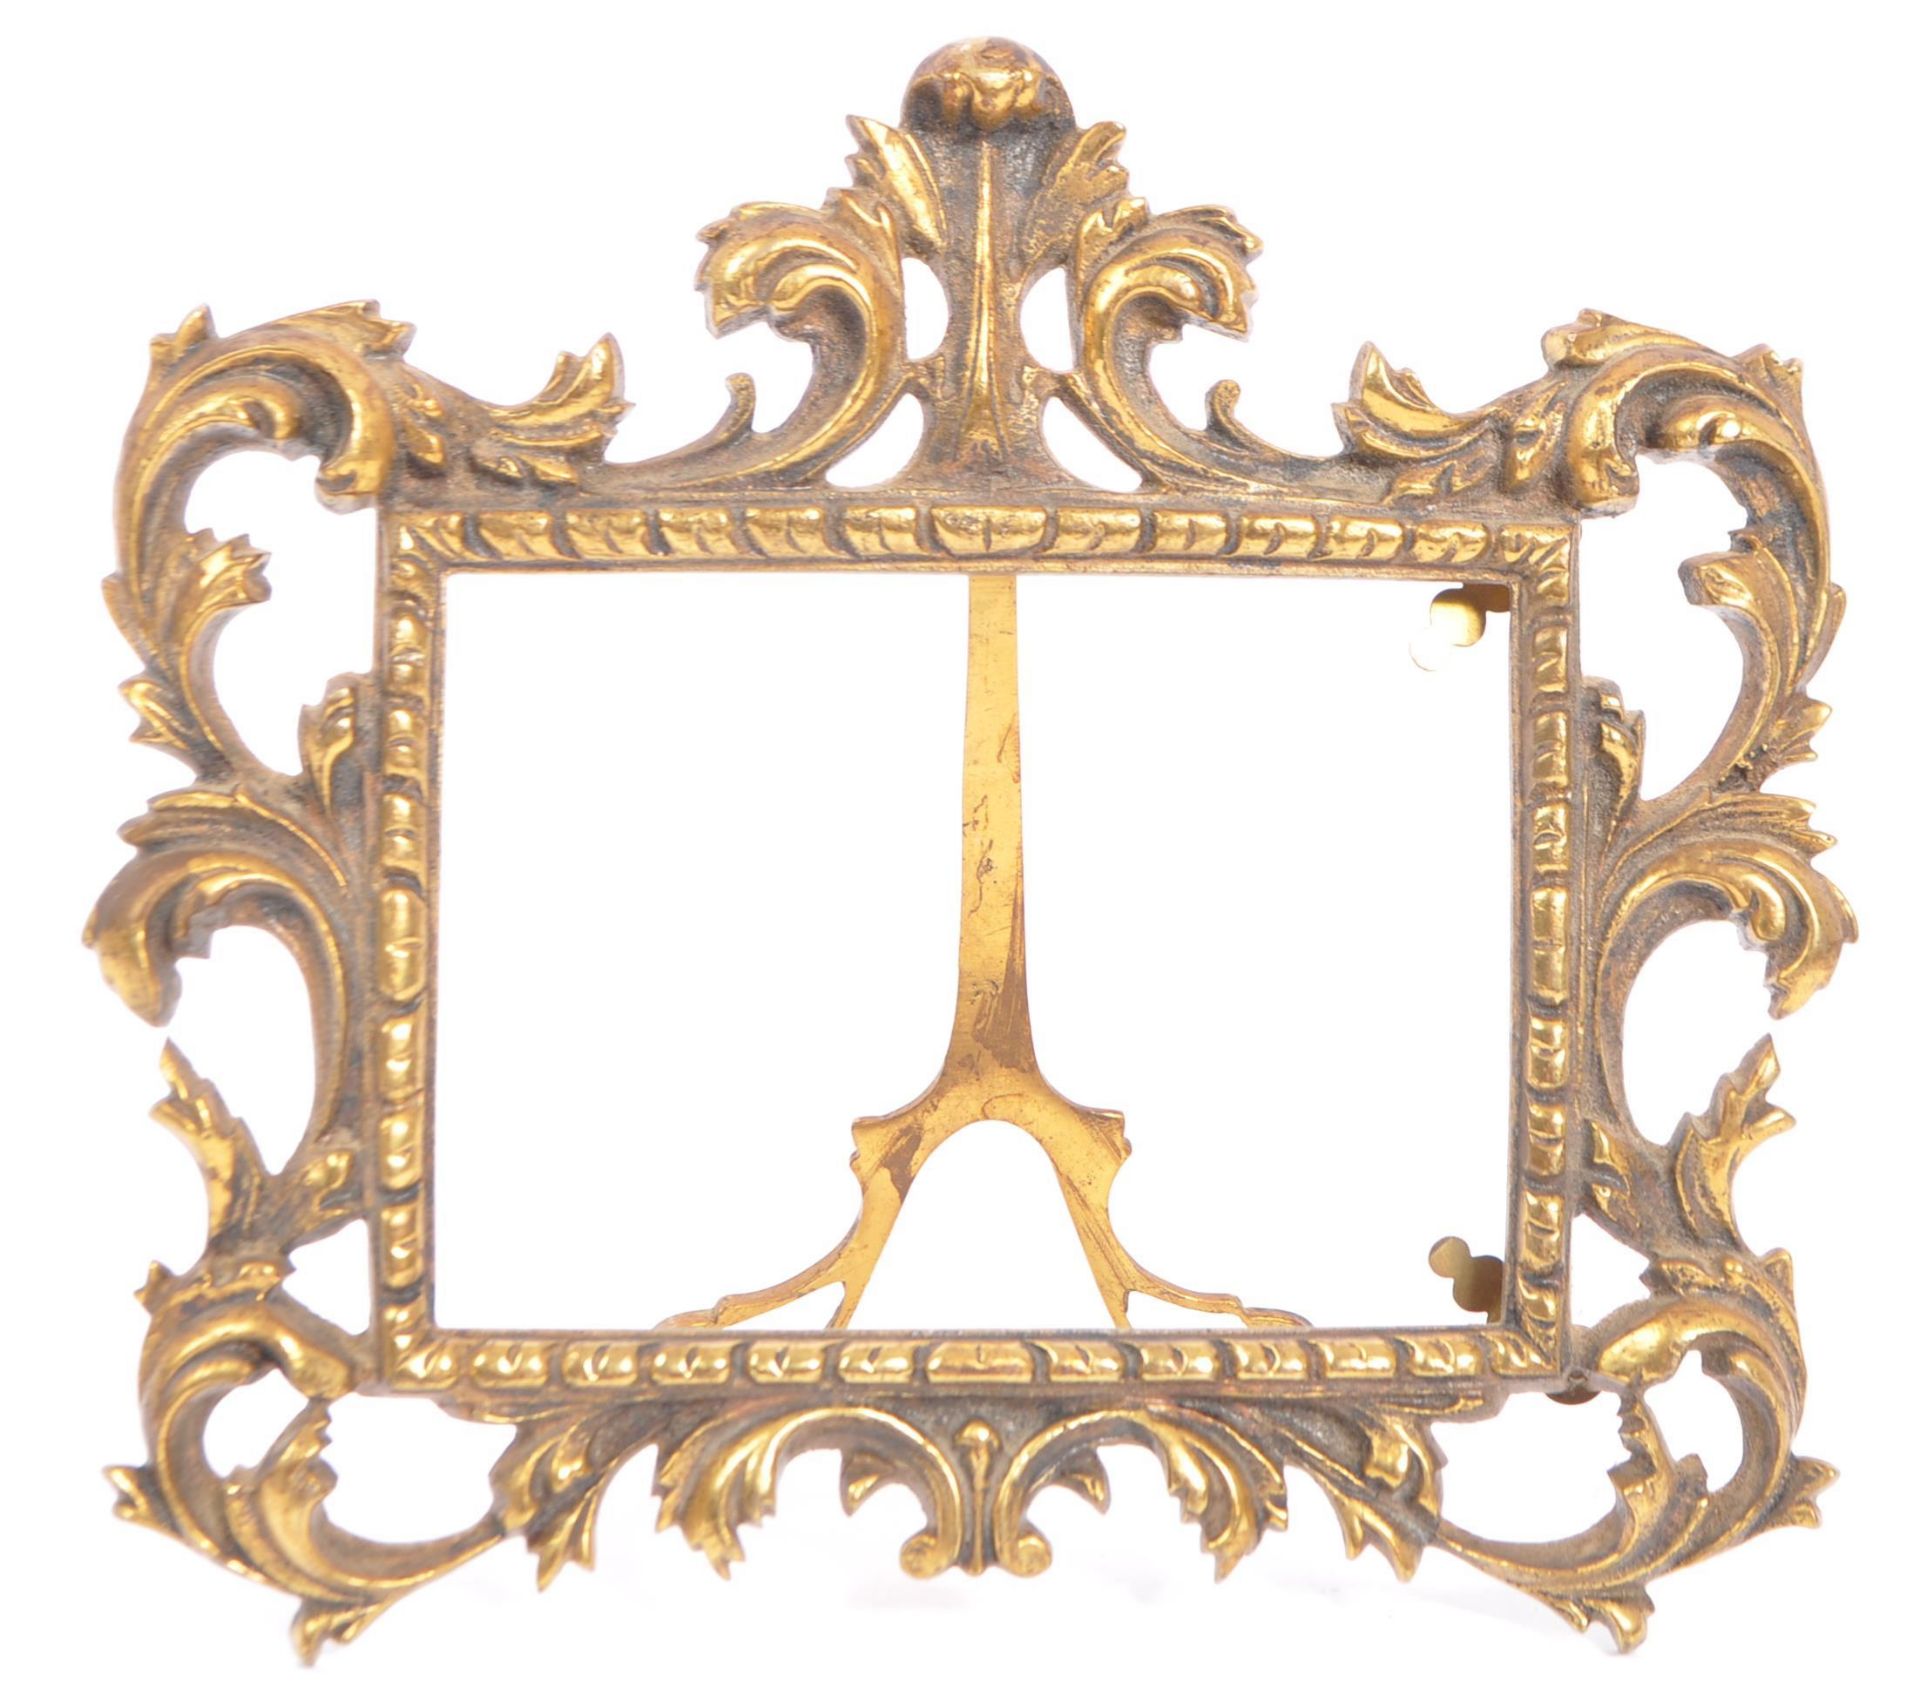 EARLY 20TH CENTURY CONTINENTAL BRASS PHOTOGRAPH FRAME - Image 2 of 3